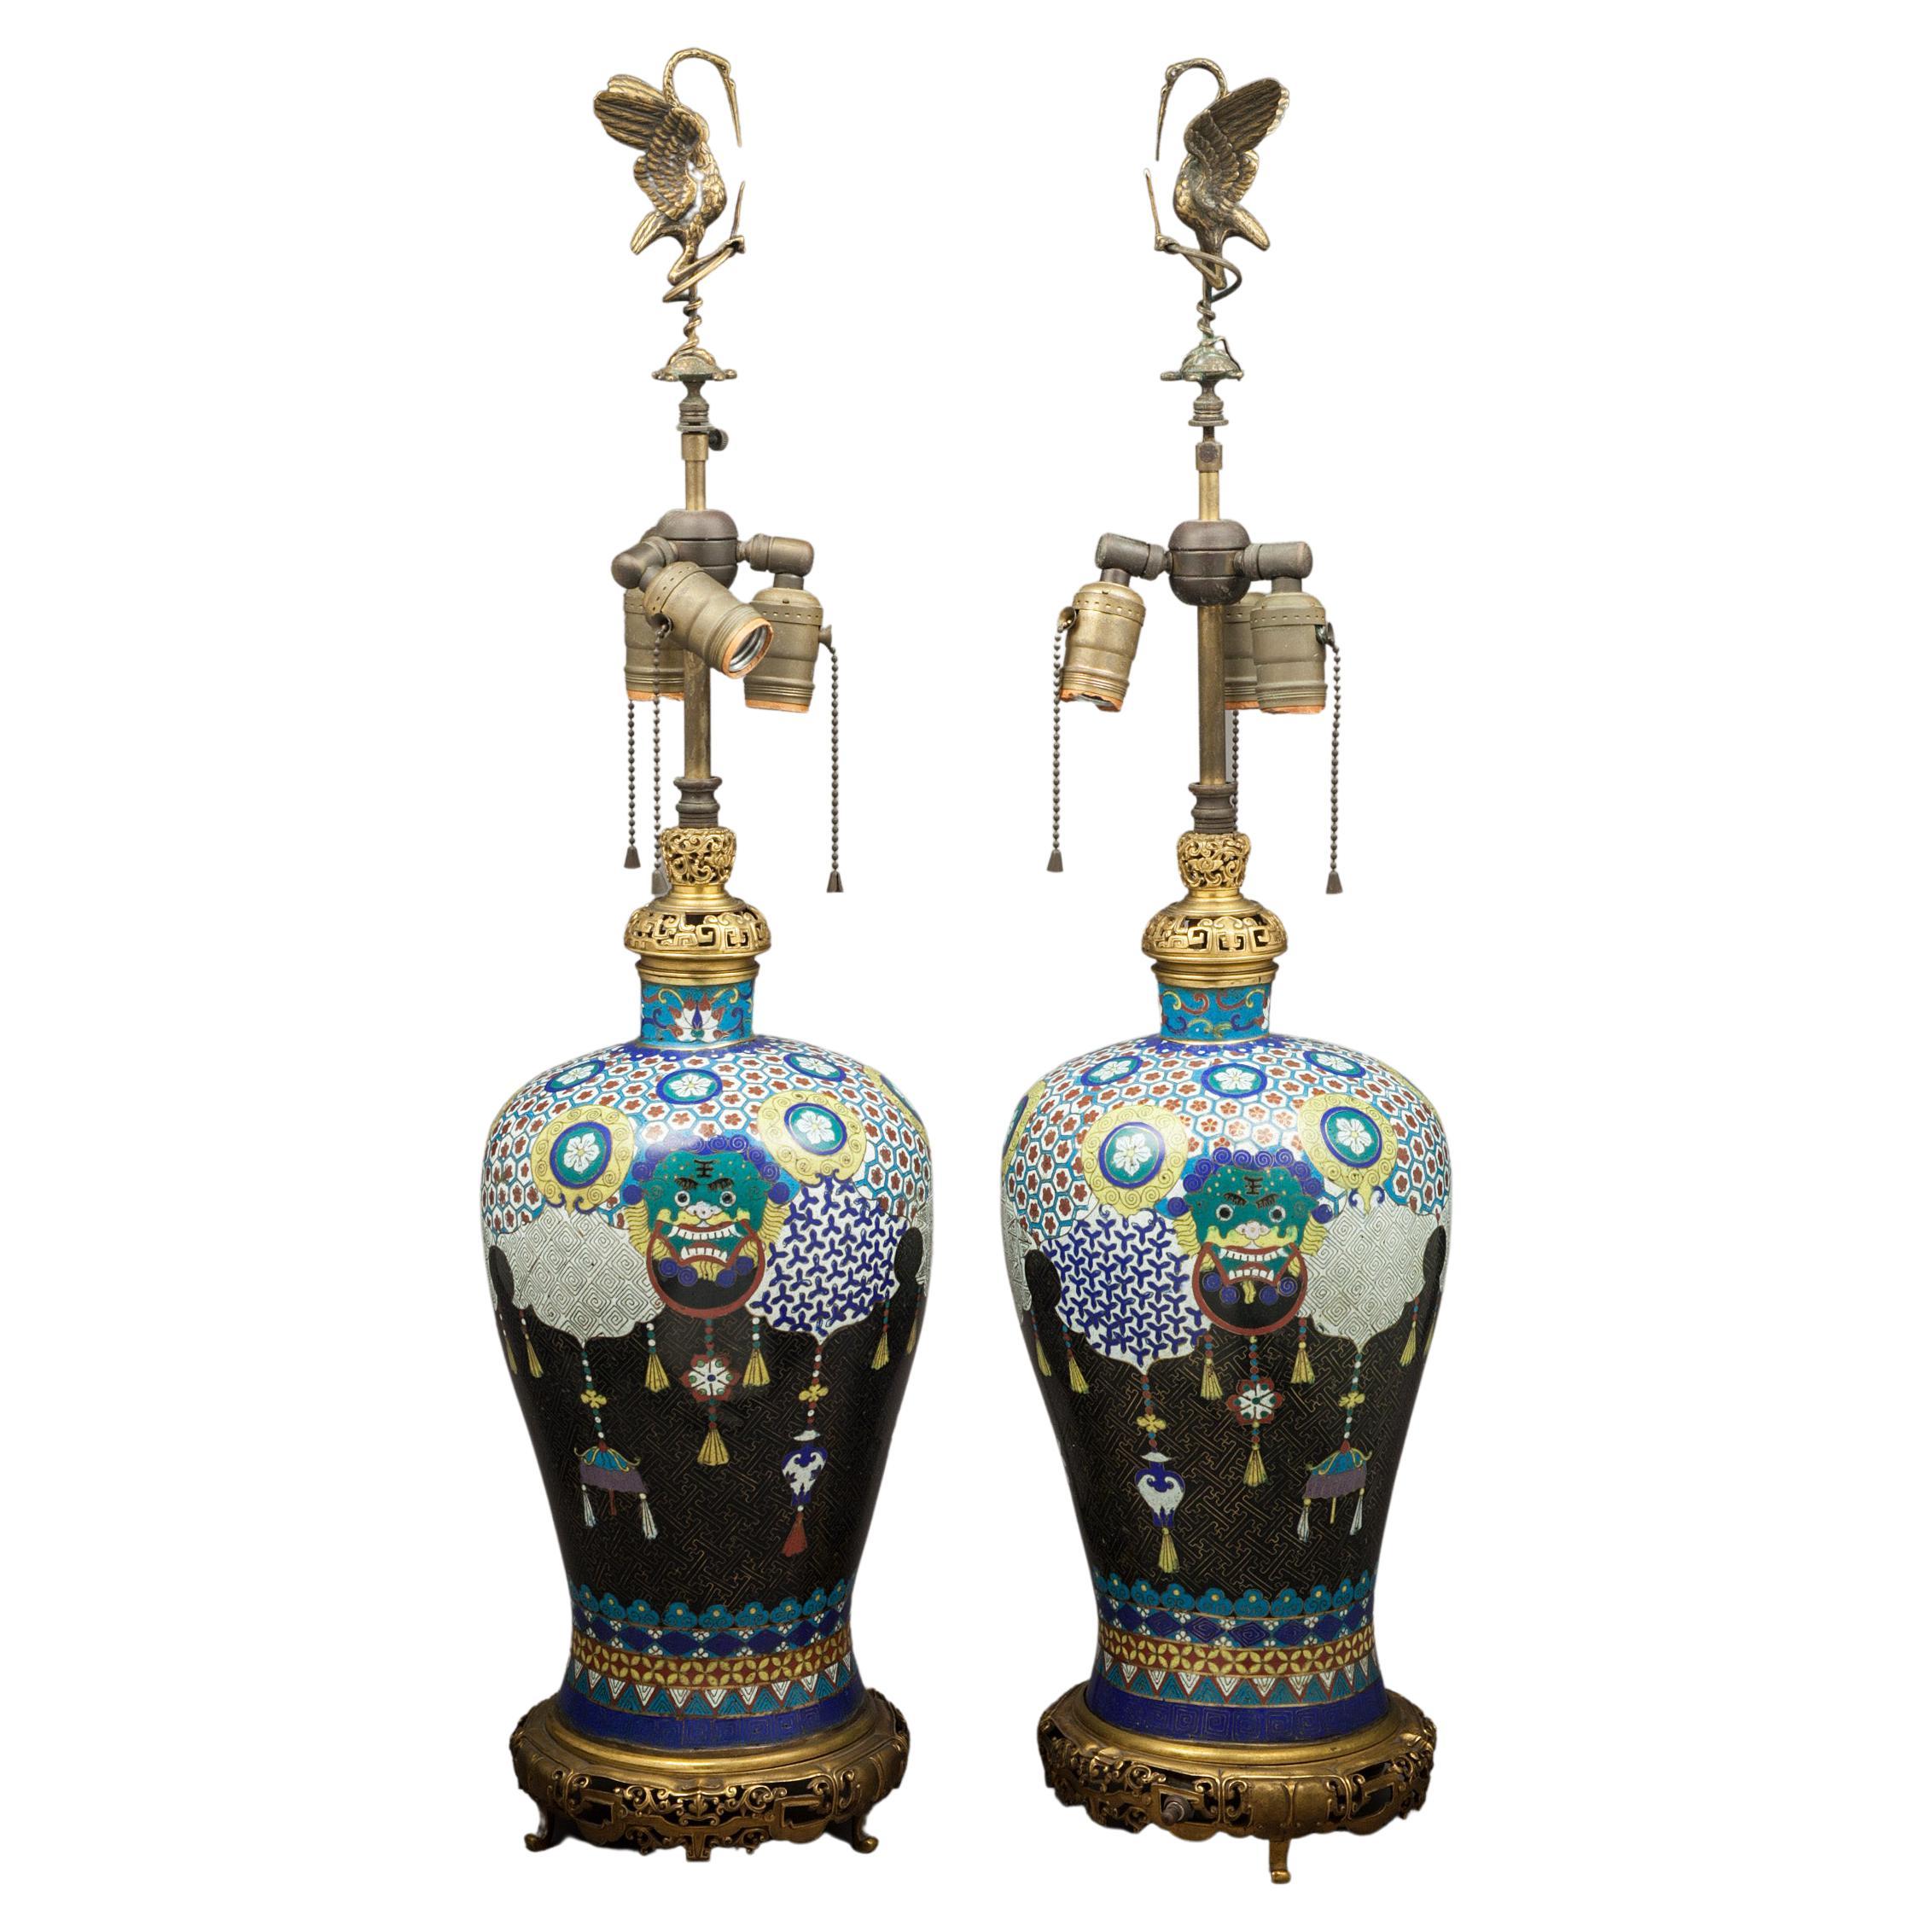 Pair of Bronze Mounted Cloisonné Chinoiserie Lamps, French, circa 1880 For Sale